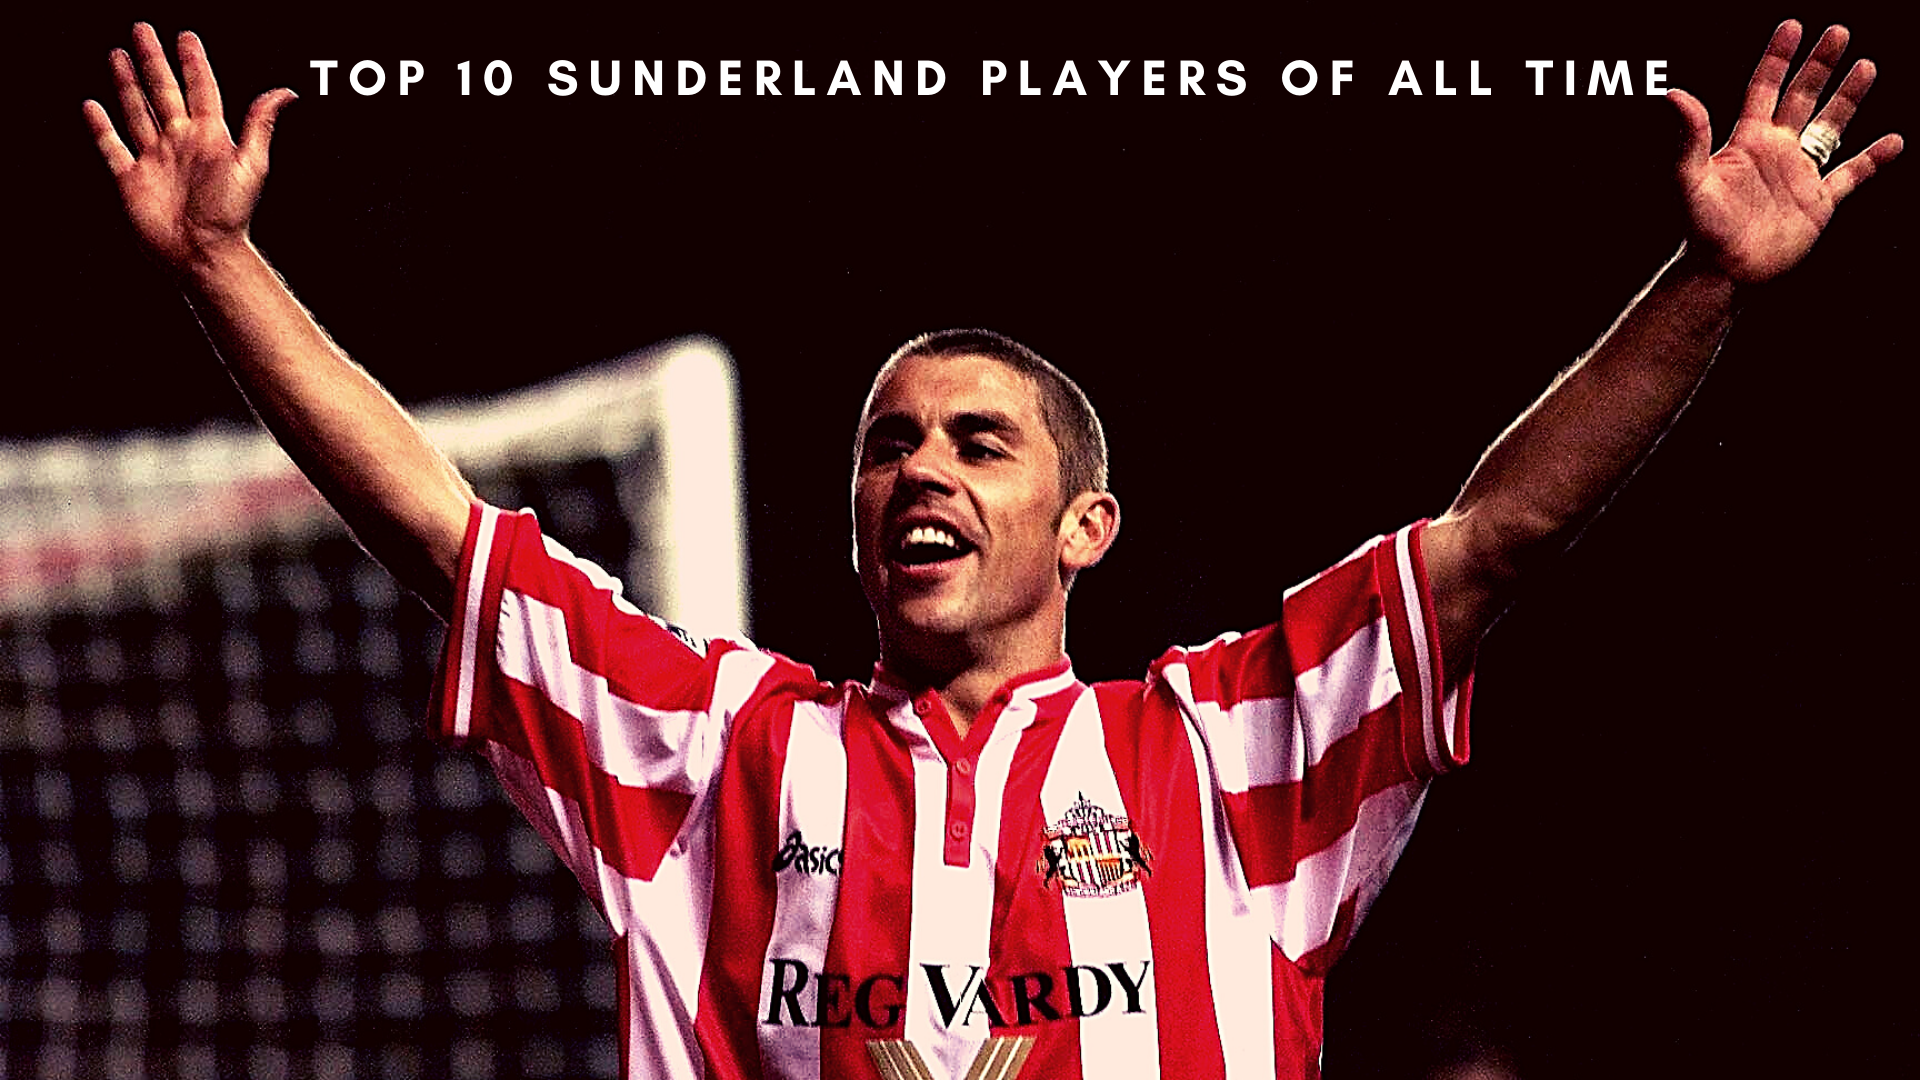 Here is a list of Top 10 Sunderland Players of All Time. (Credit: thesportsman.com)